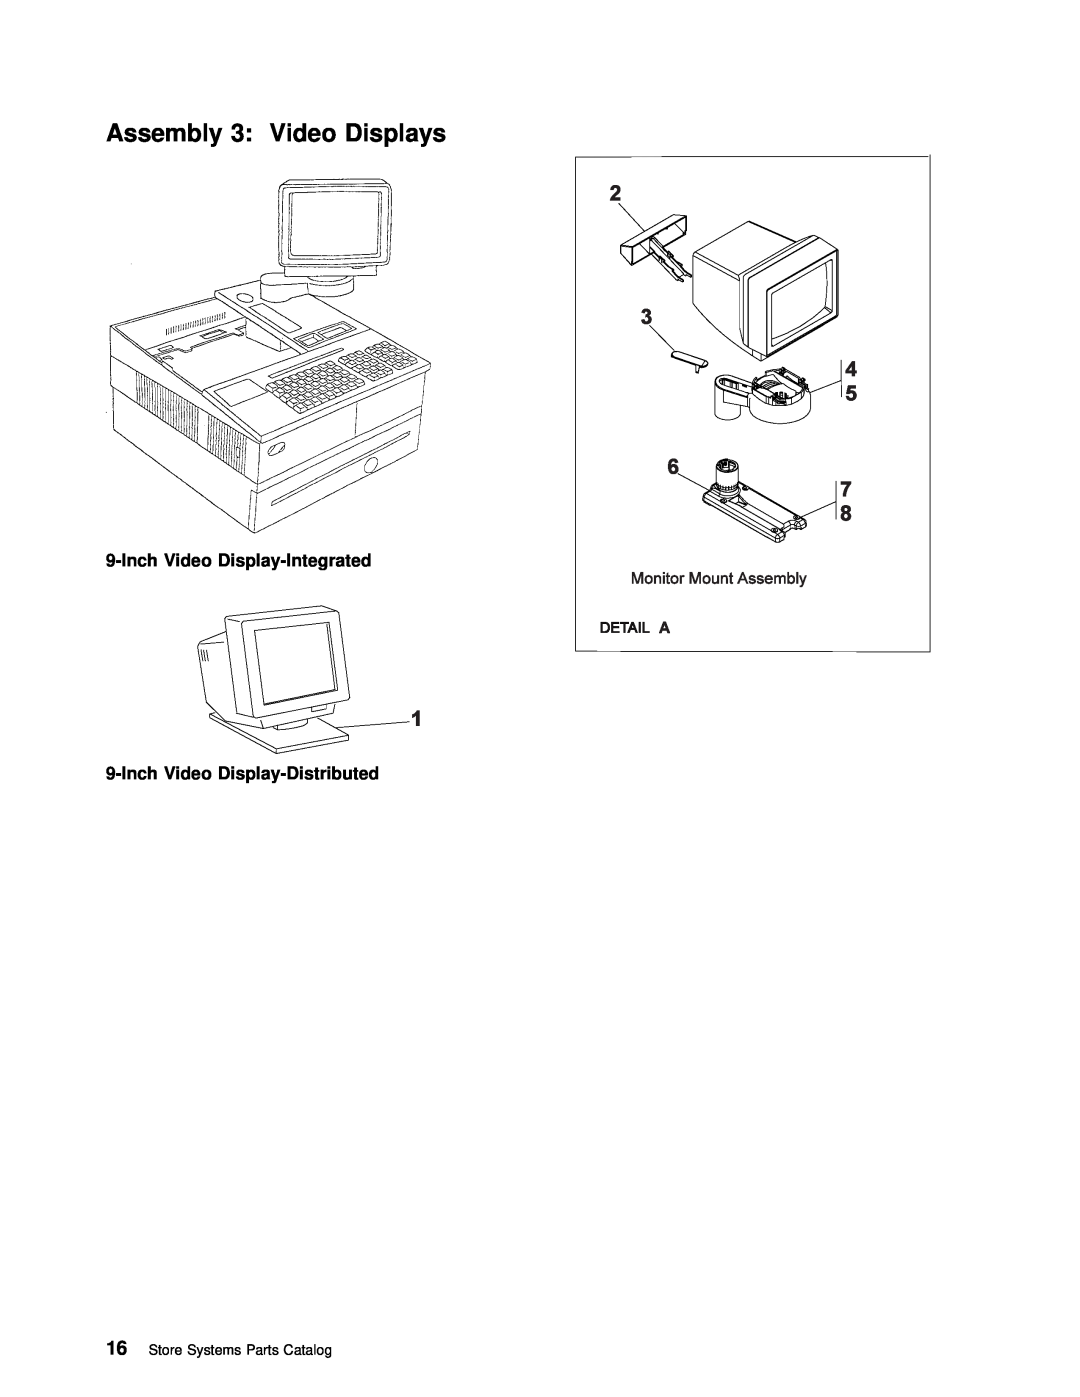 IBM 4693 DBCS FAMILY manual Assembly 3 Video Displays, Inch Video Display-Integrated 9-Inch Video Display-Distributed 